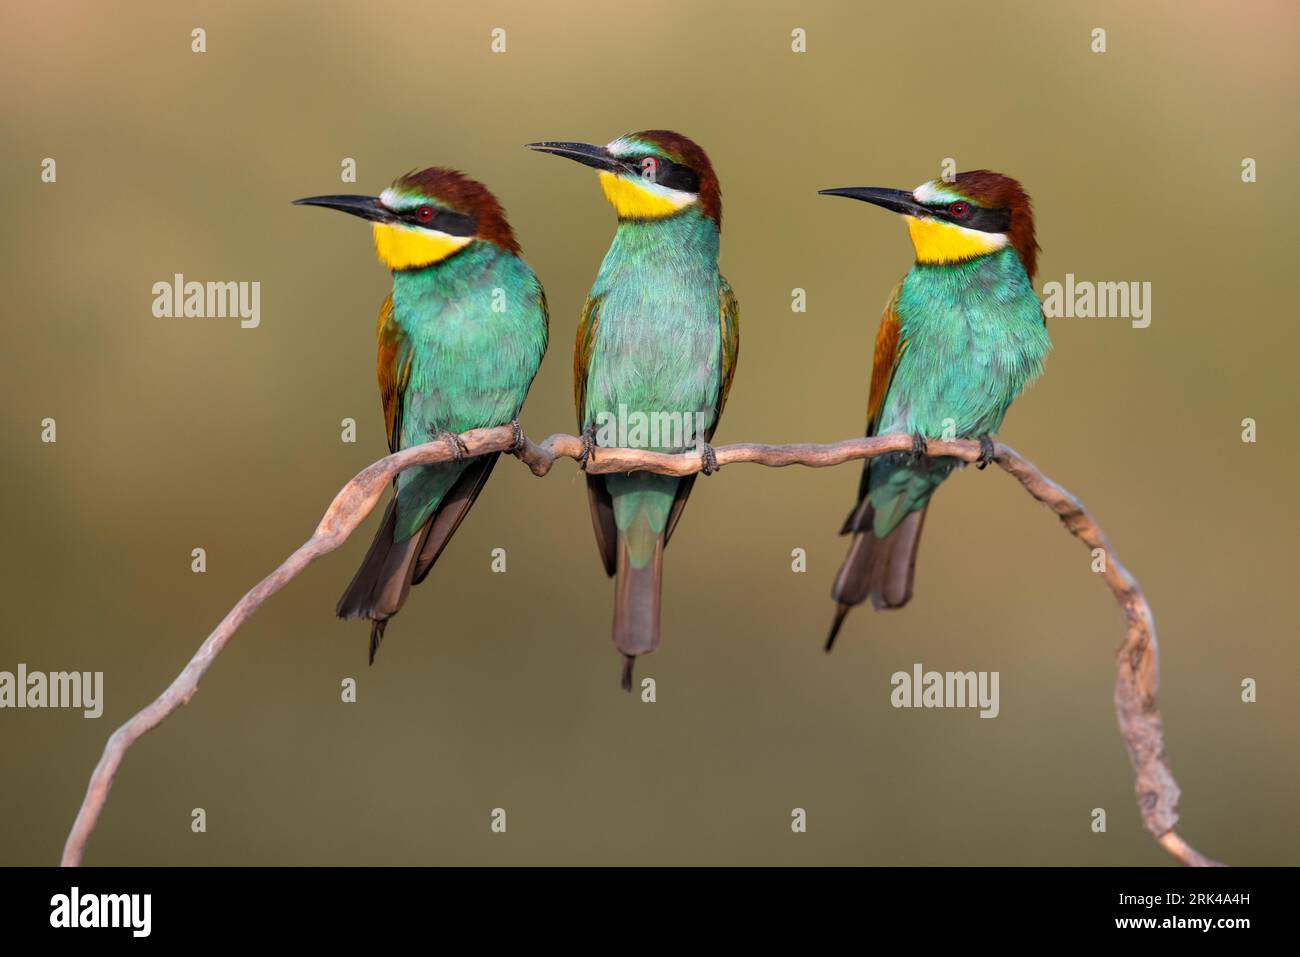 European Bee-eater, Merops apiaster, in Italy. Three bee-eaters together, sitting on a branch. Stock Photo